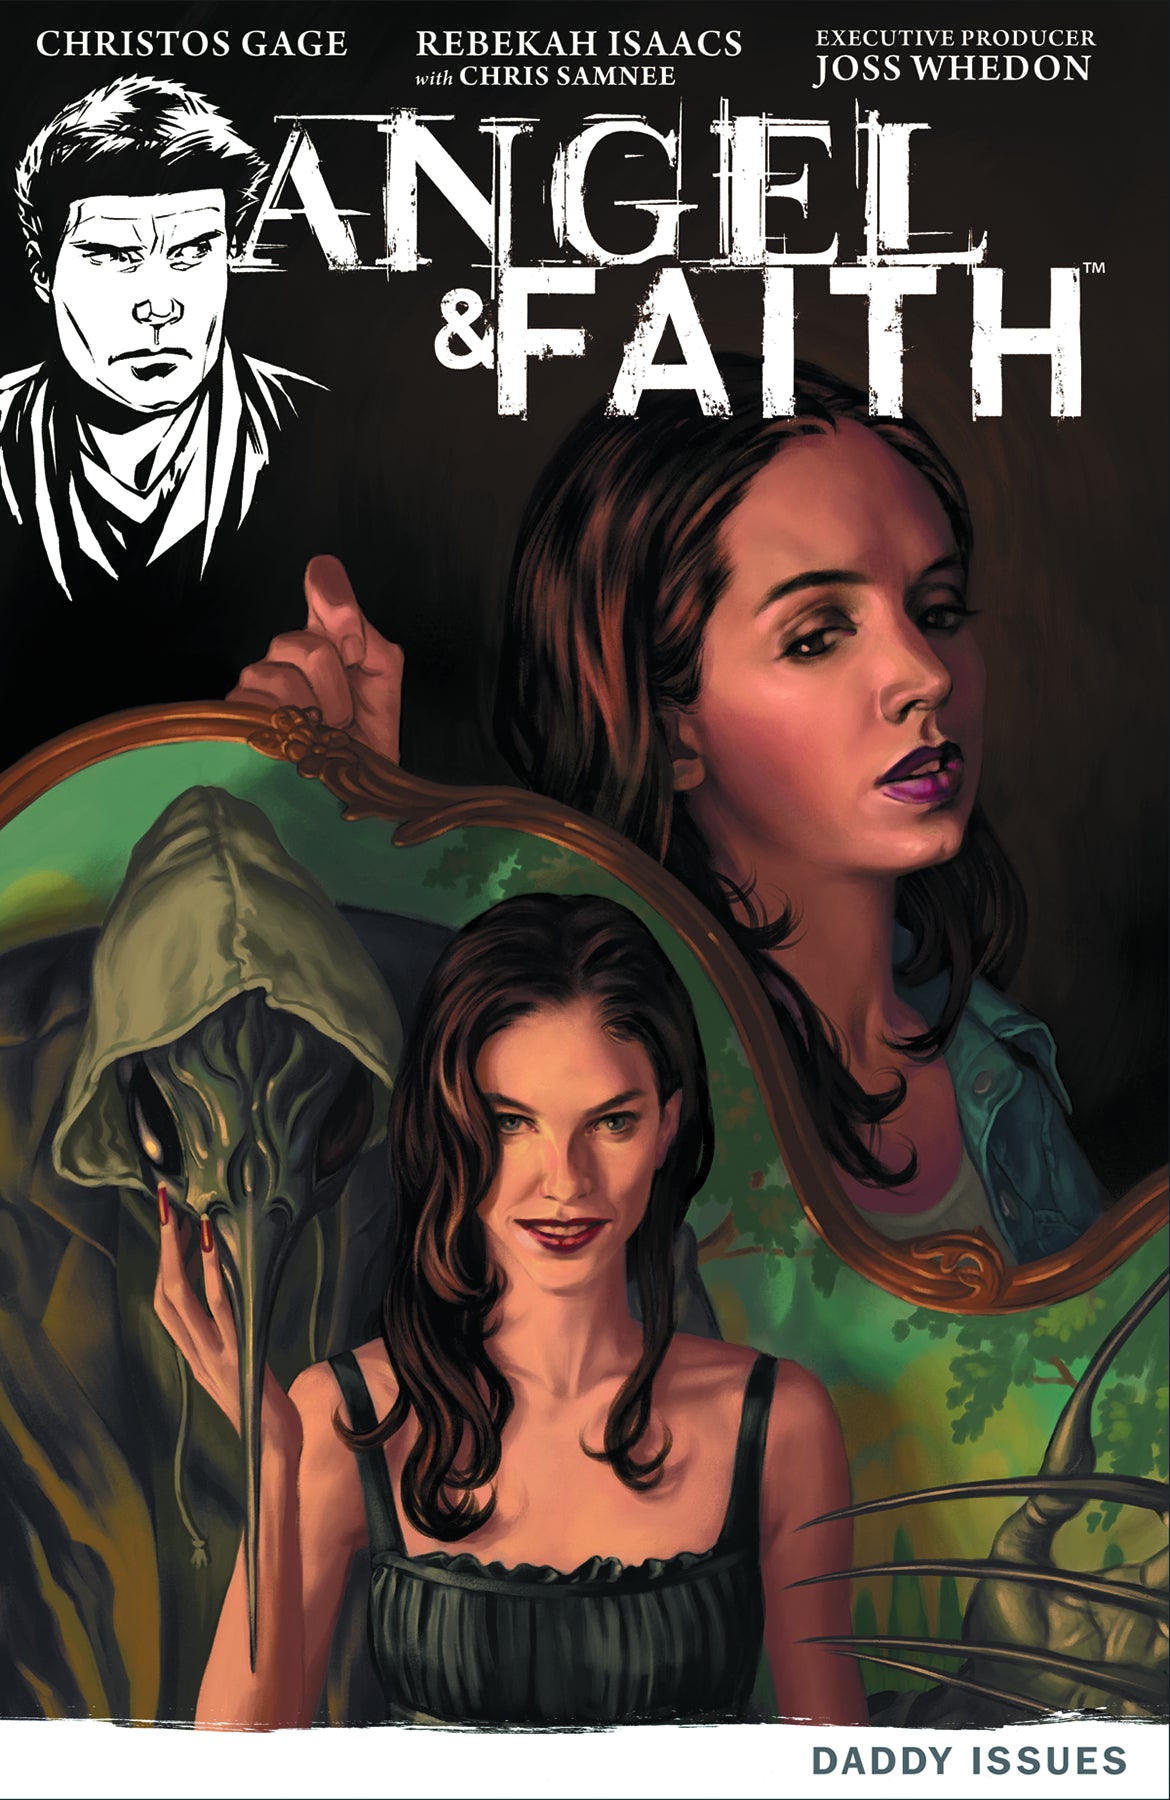 ANGEL & FAITH TP VOL 02 DADDY ISSUES (C: 0-1-2) | L.A. Mood Comics and Games